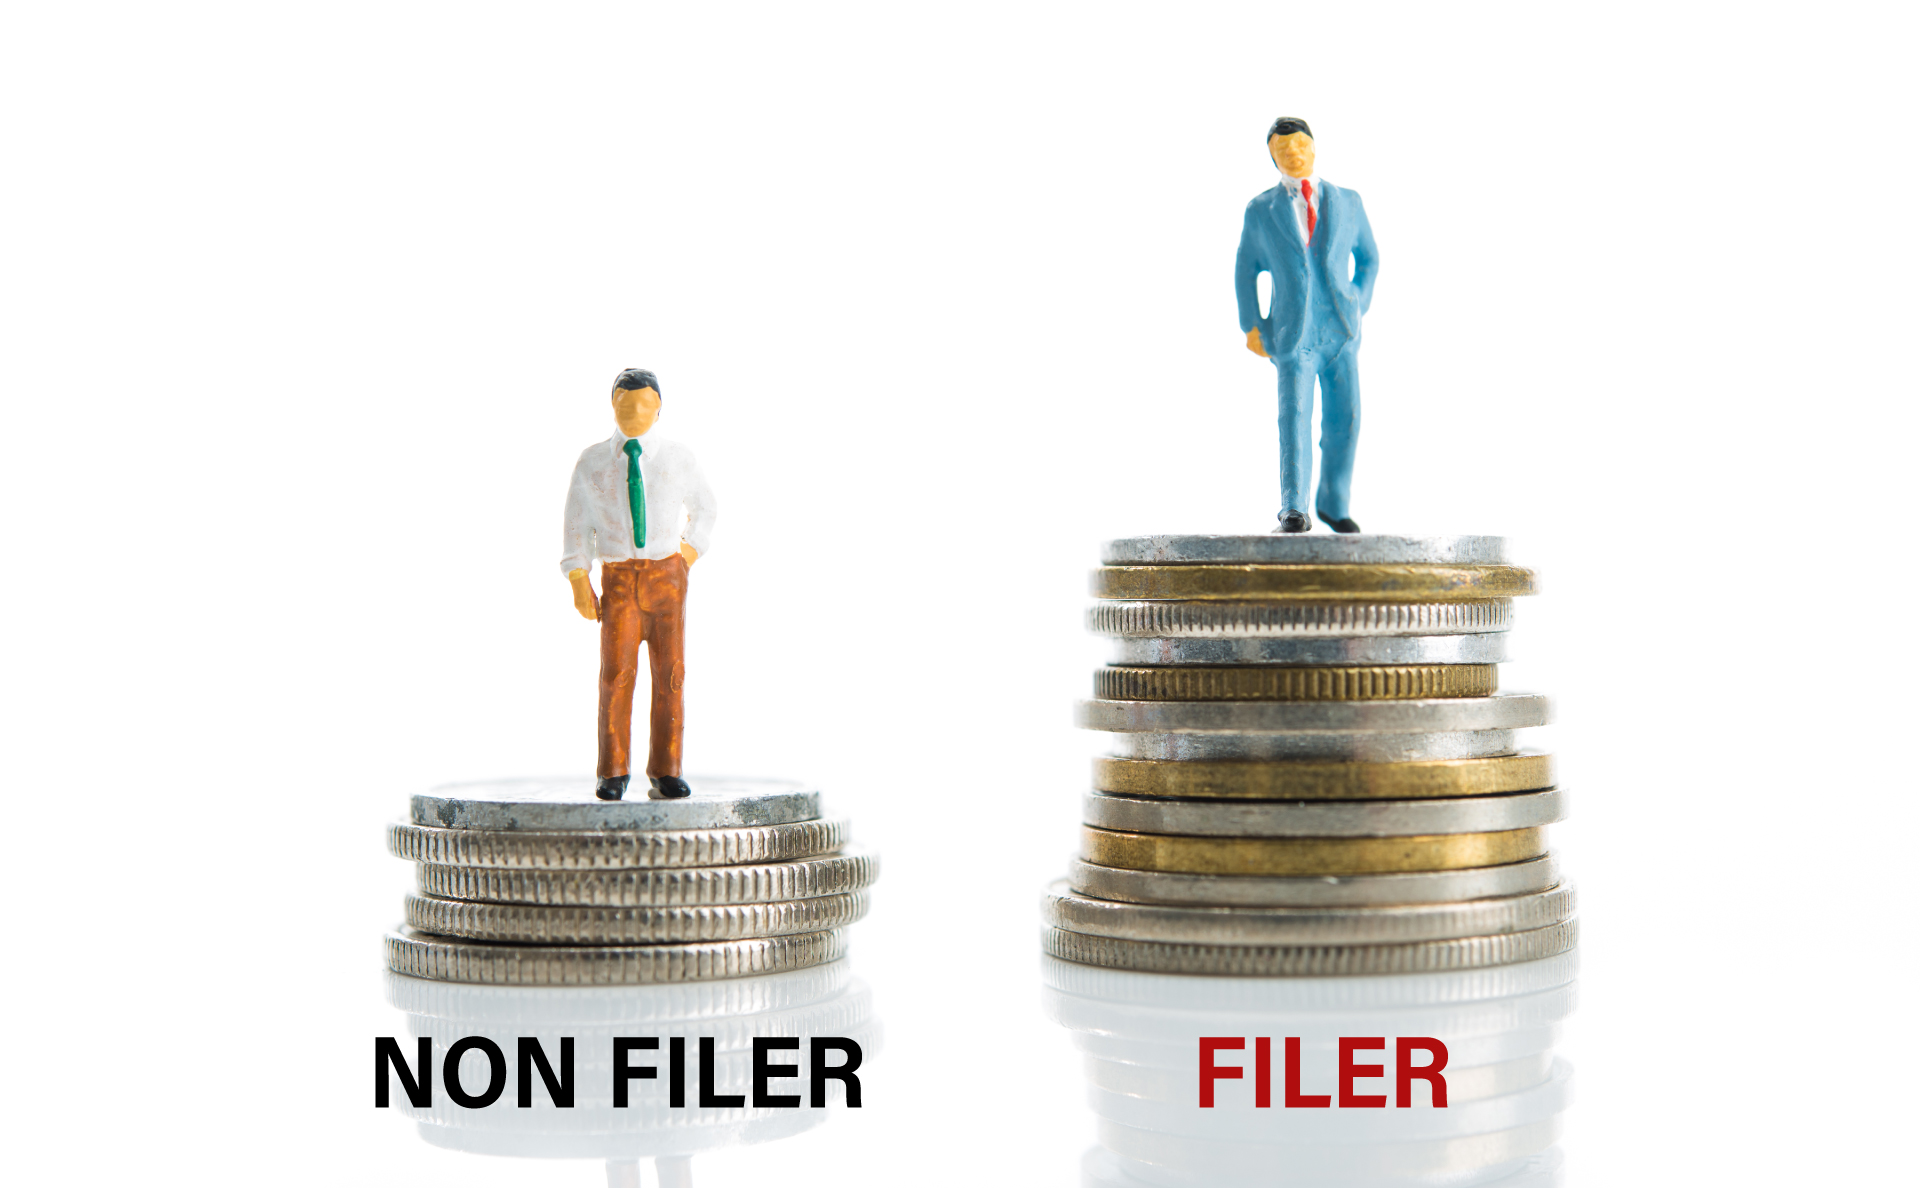 How I should Benefit from Becoming a Filer in Pakistan?